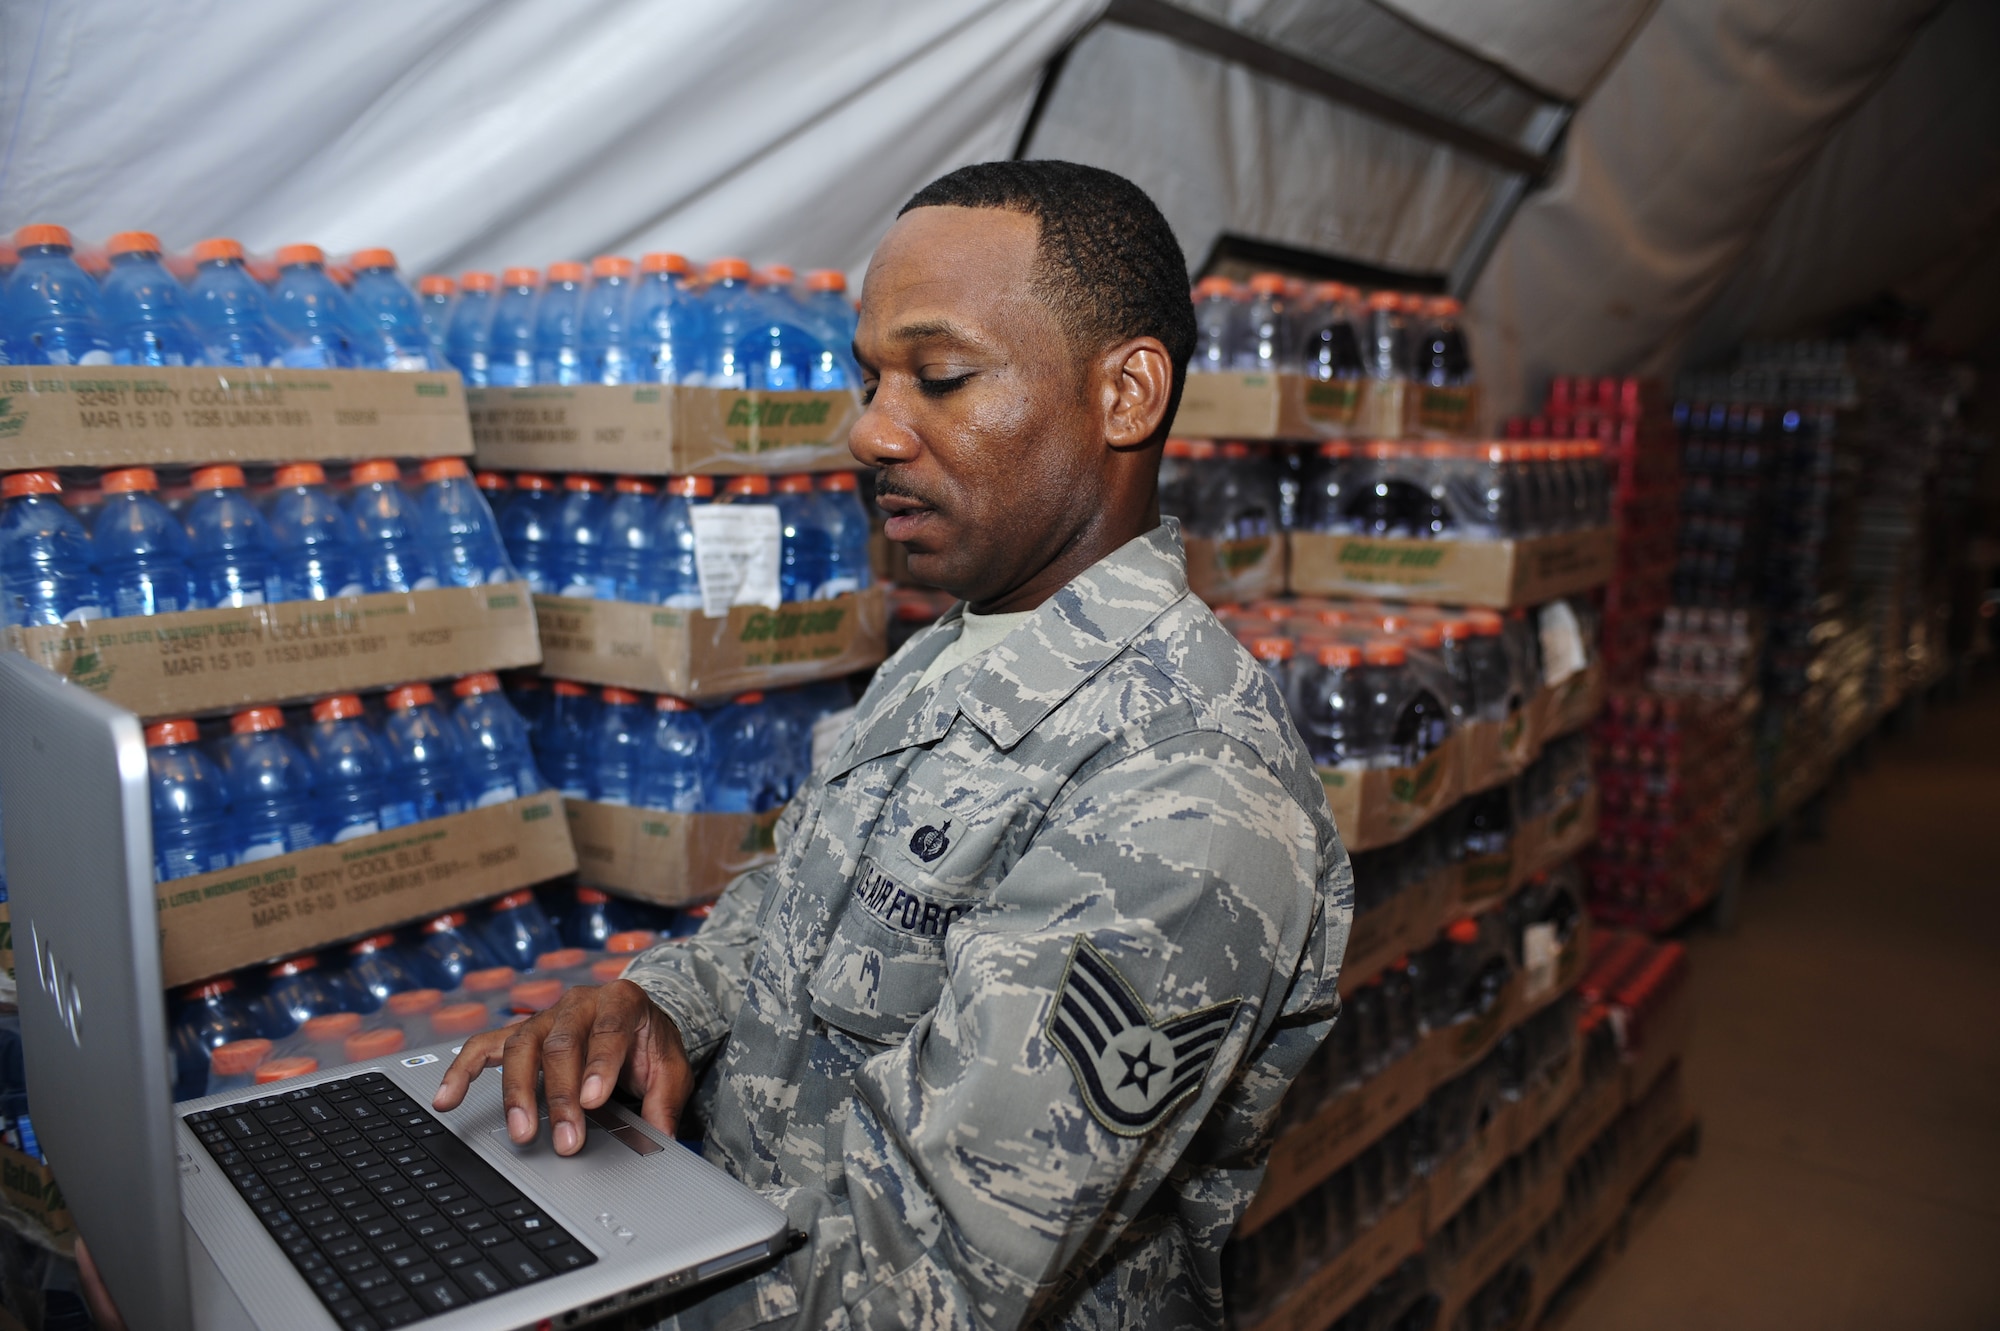 SOUTHWEST ASIA -Staff Sgt. Marvin Daniels, 380th Expeditionary Force Support Squadron, reviews the flight line storage room inventory Aug. 21. Sergeant Daniels is deployed from the 187th Fighter Wing, and grew up in Montgomery, Ala.  (U.S. Air Force photo/Tech. Sgt. Charles Larkin Sr)